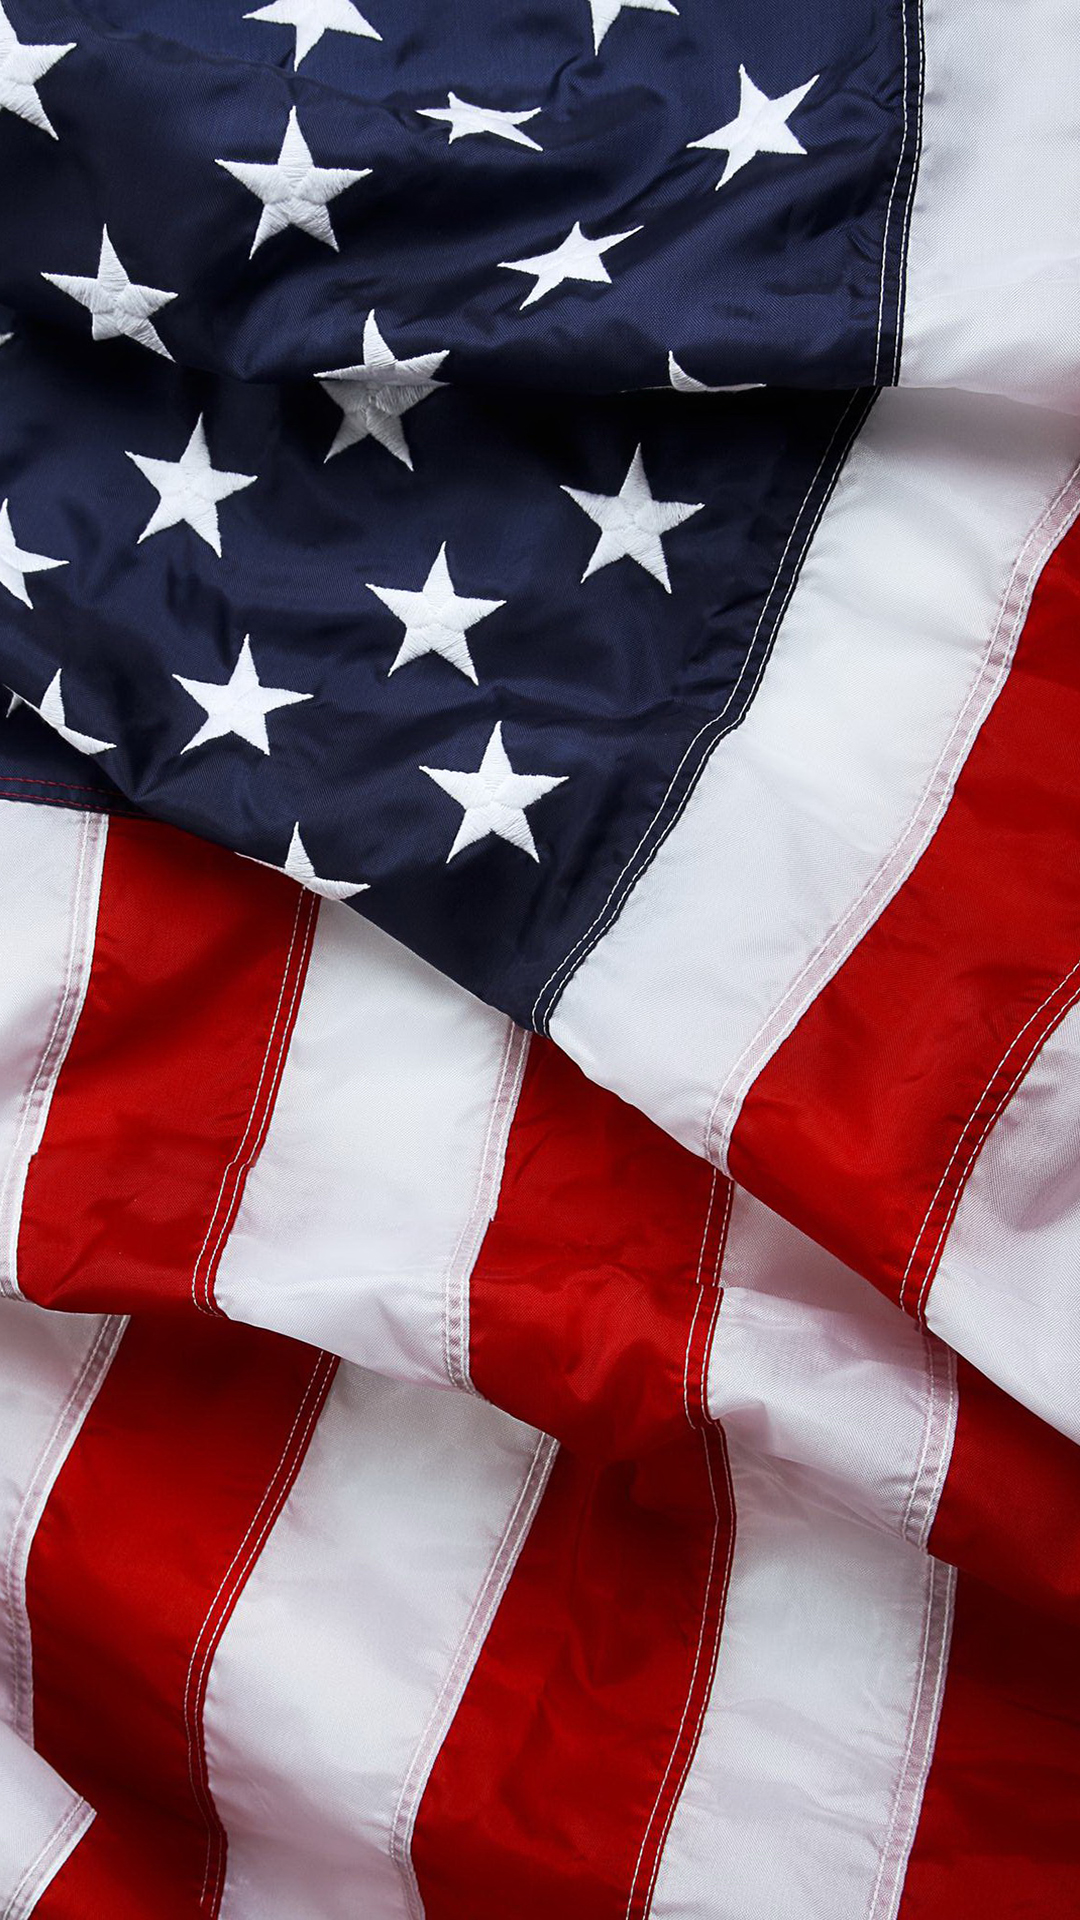 American Flag htc one wallpaper - Best htc one wallpapers, free